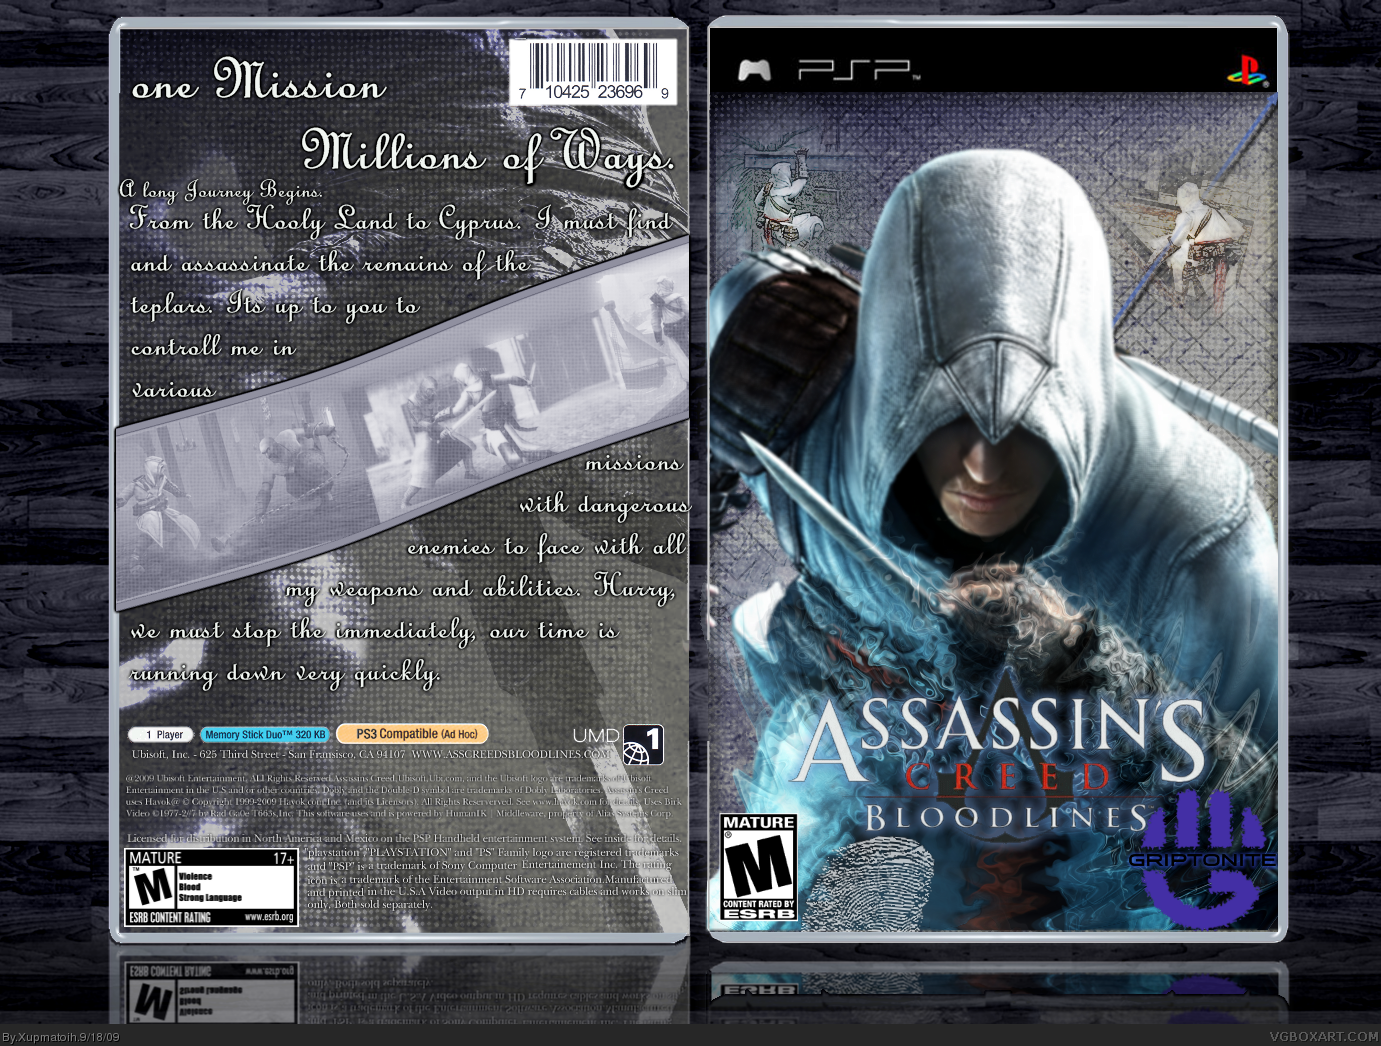 Assassins Creed; Bloodlines box cover